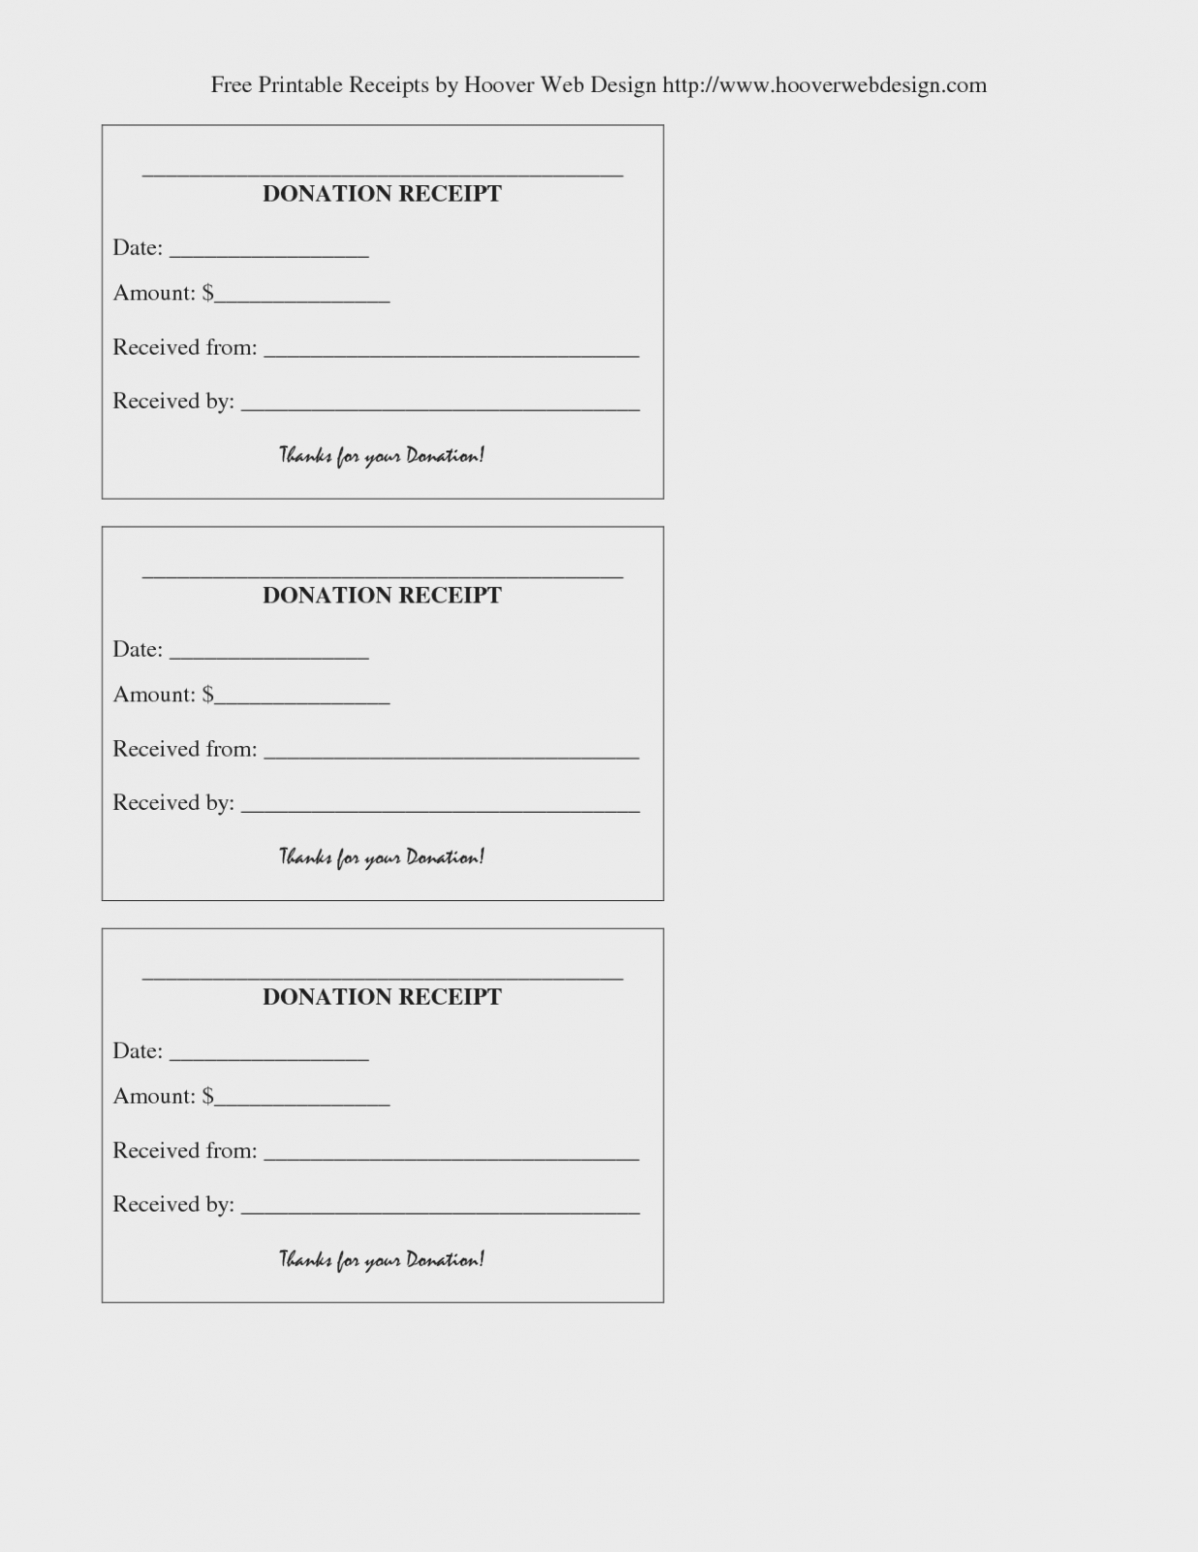 How Blank Receipt Form | Realty Executives Mi : Invoice And Resume - Free Printable Receipt Template